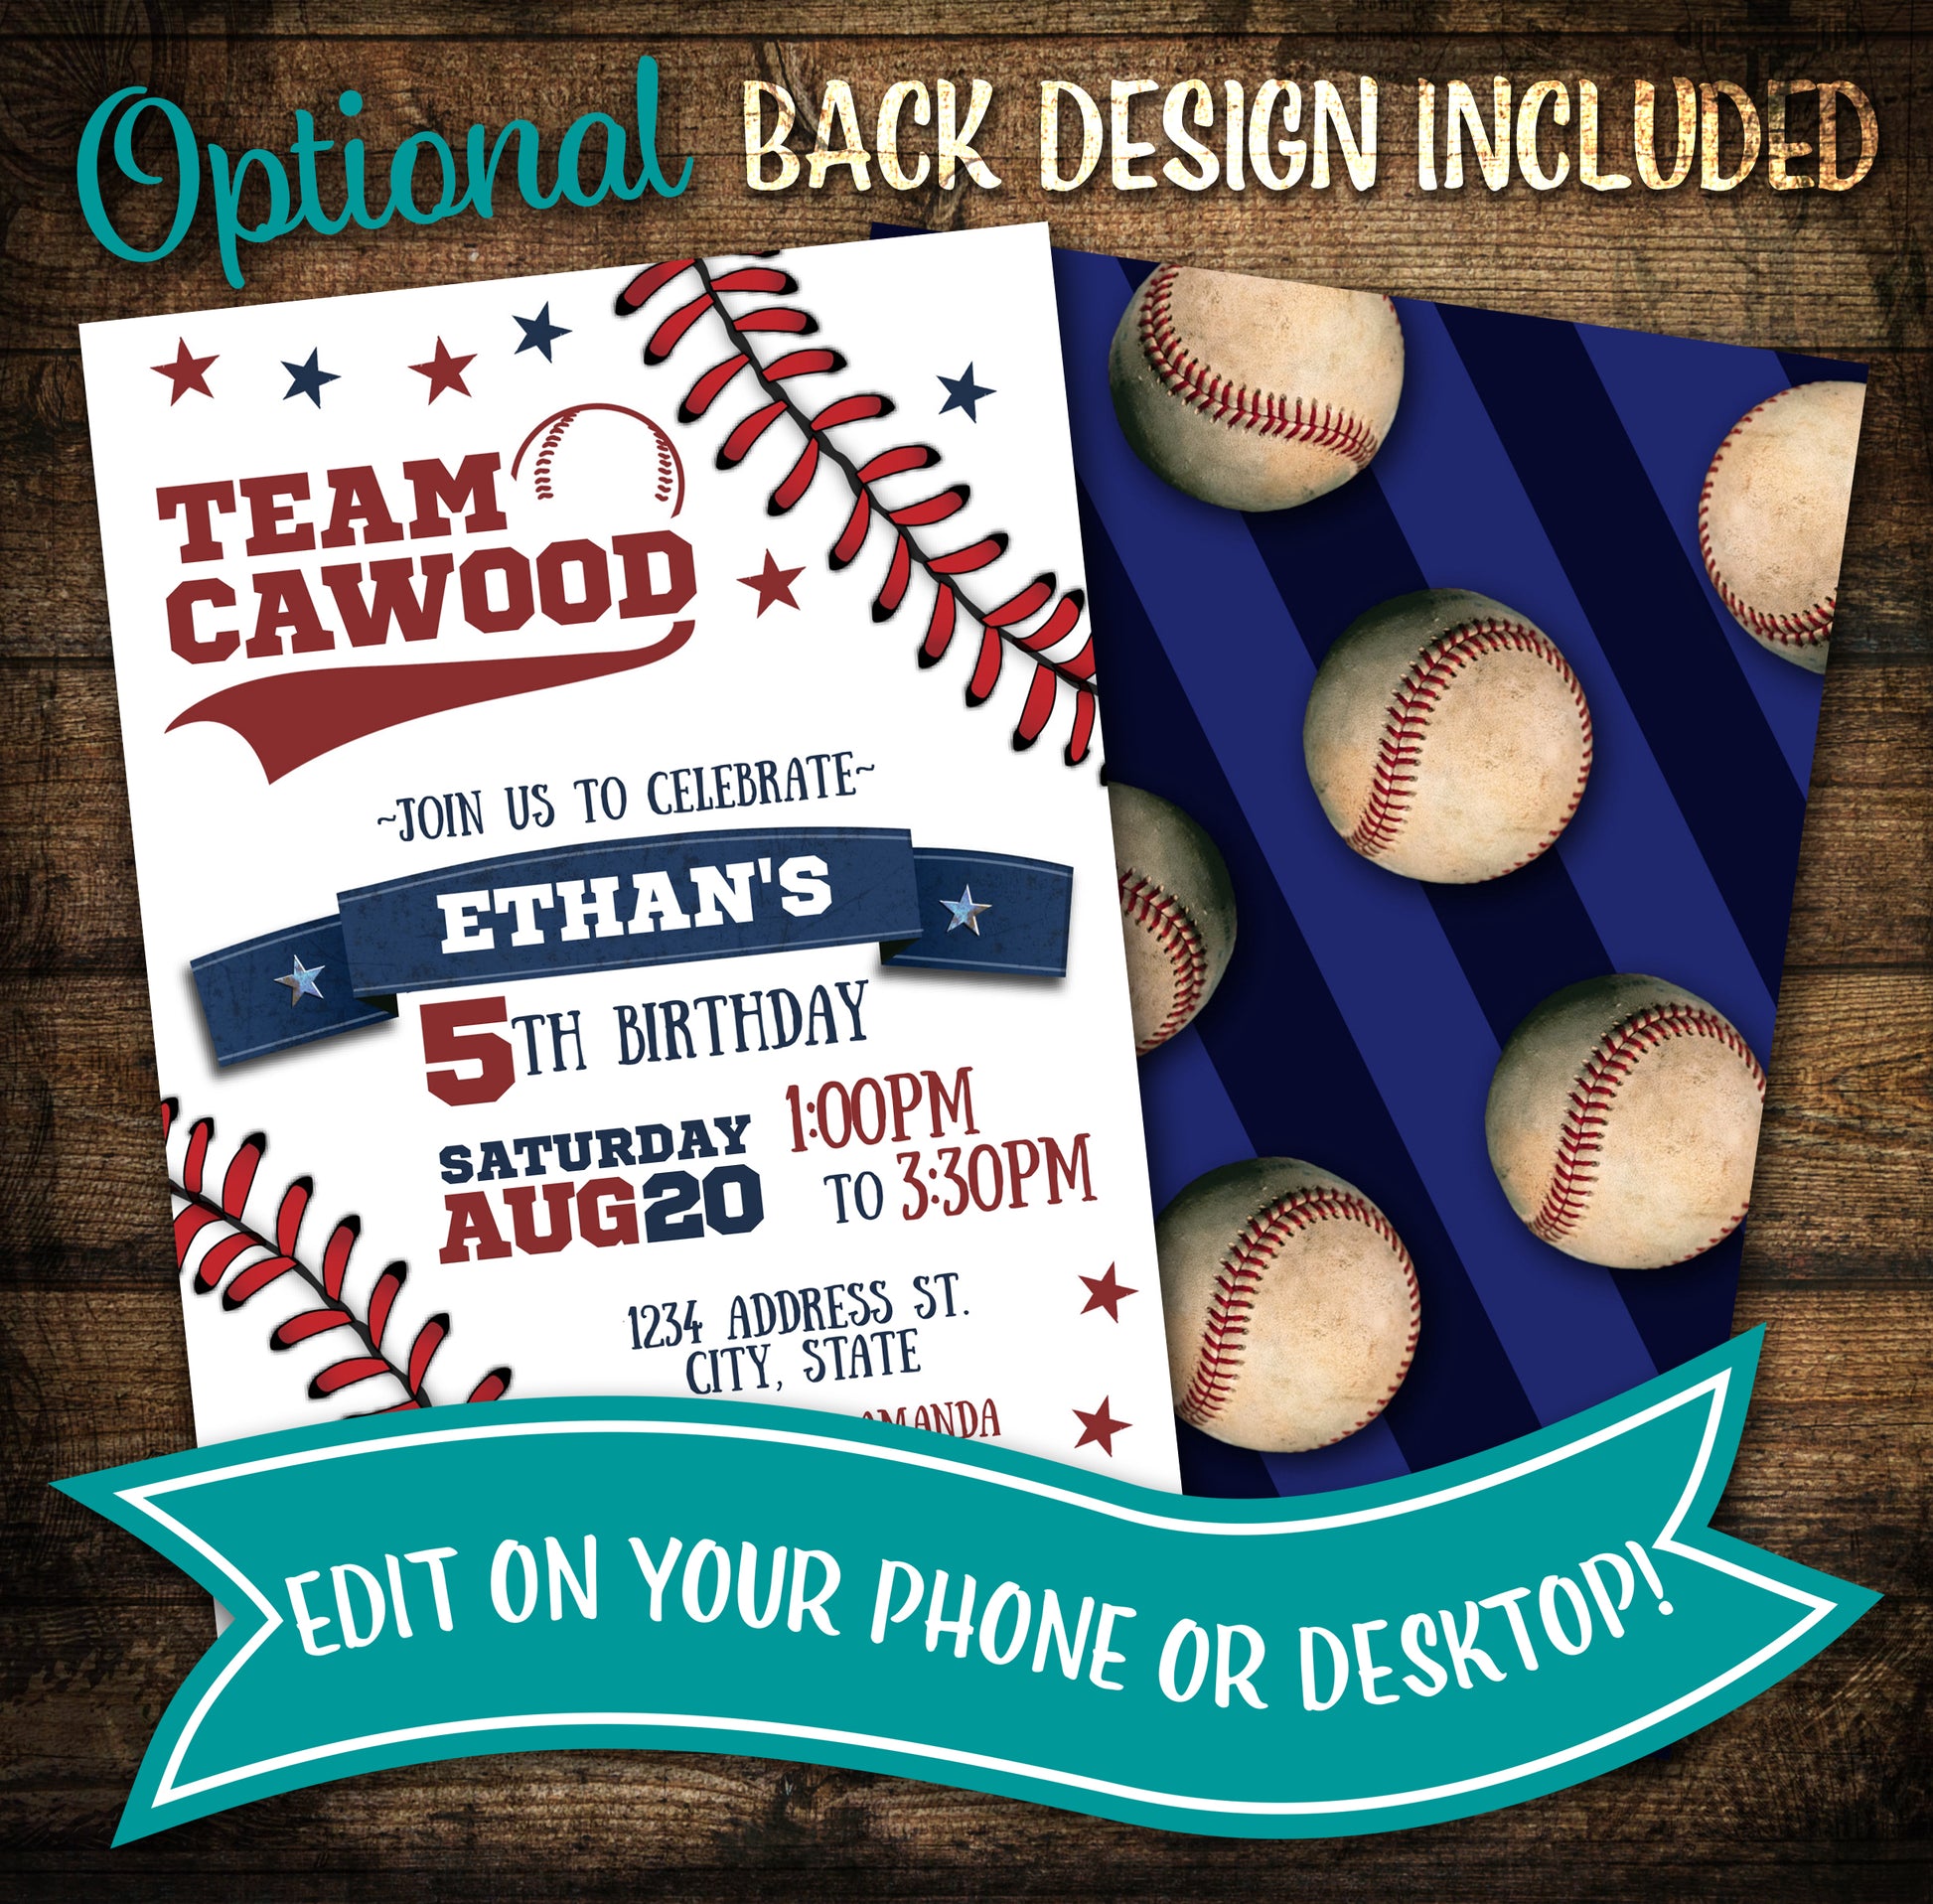 Personalized team name baseball invitation with back design